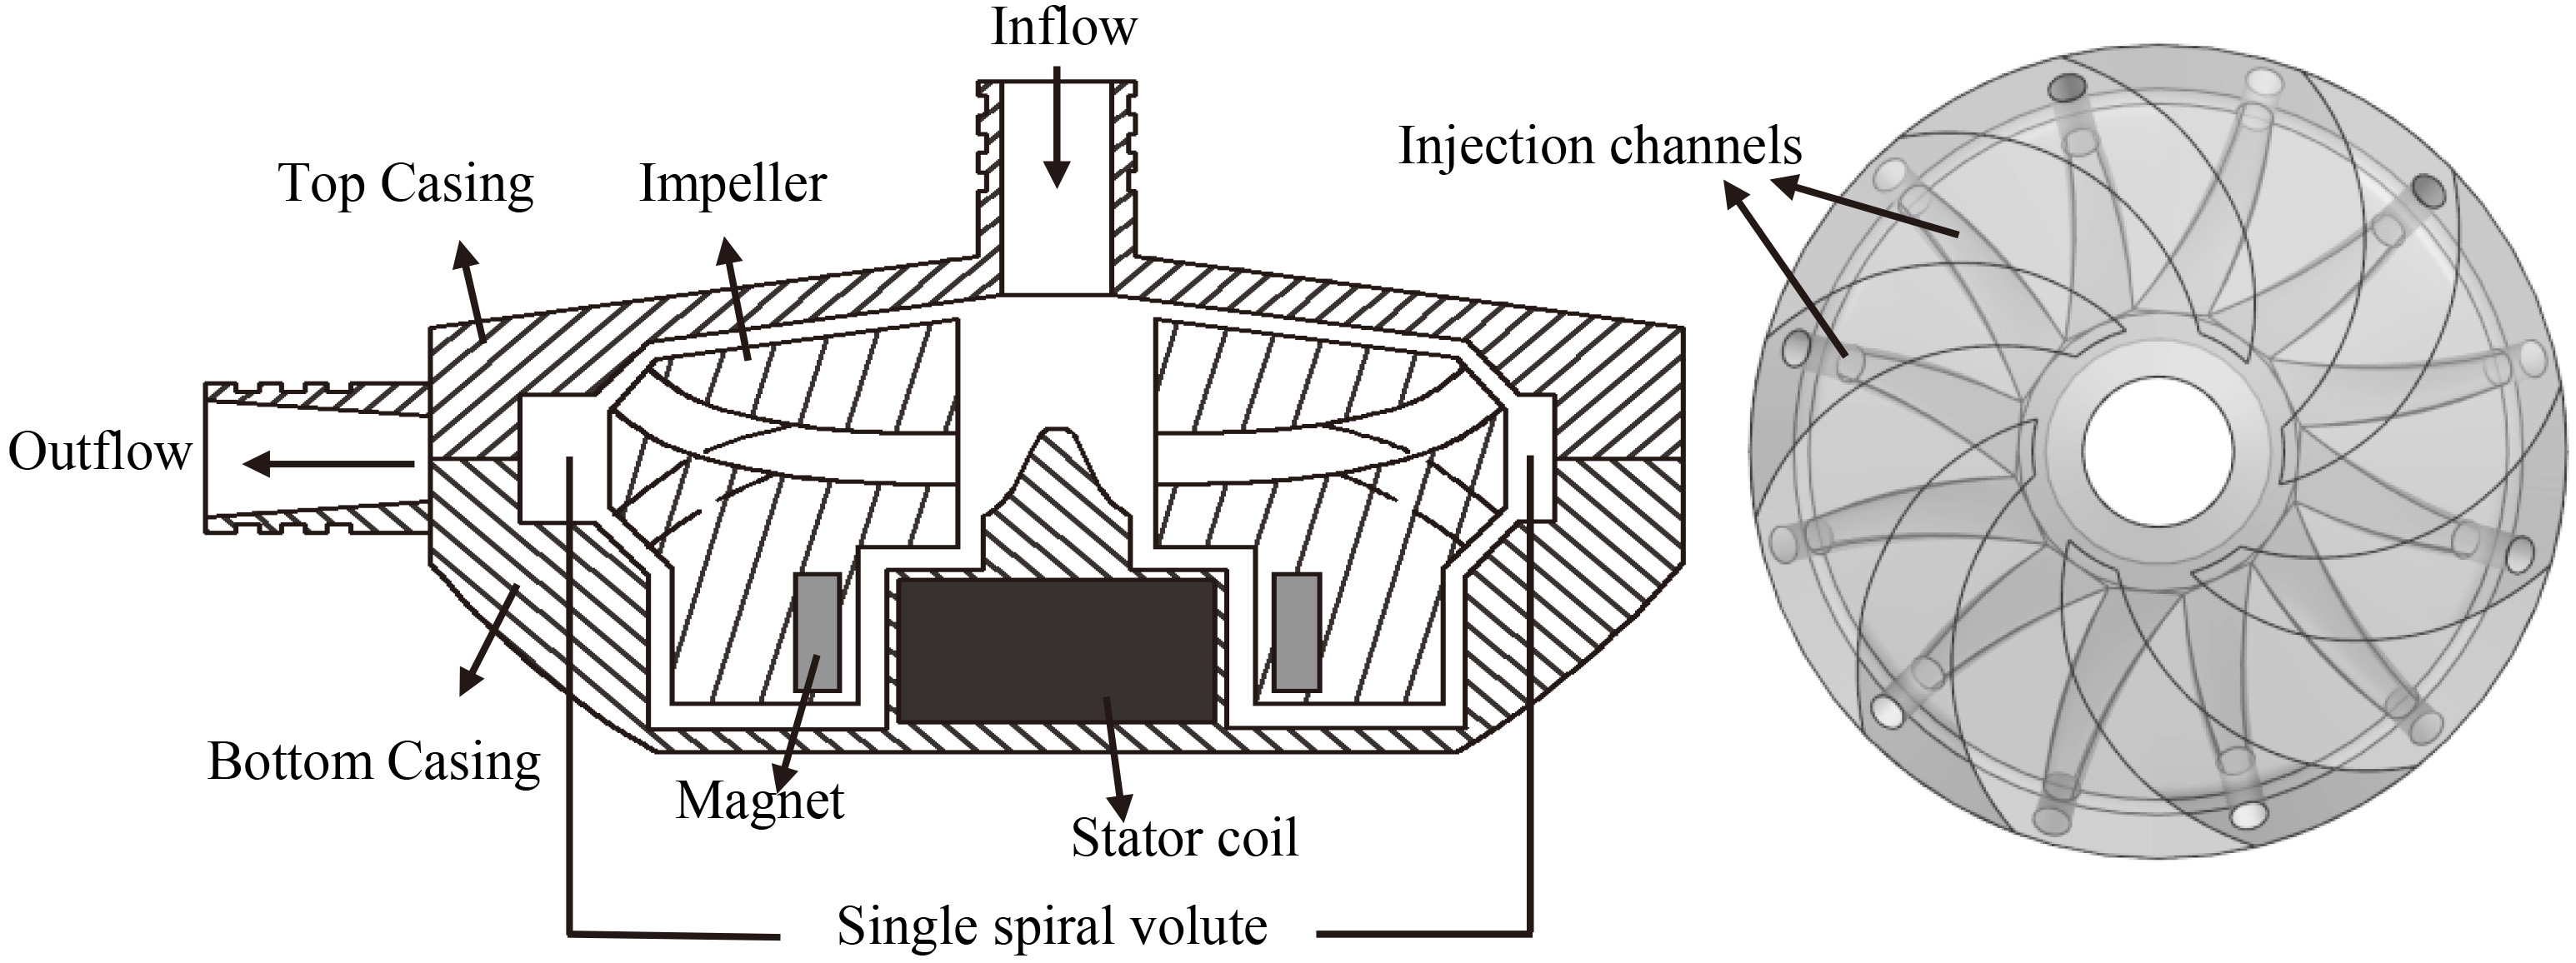 Structure of the developed centrifugal blood pump and impeller.